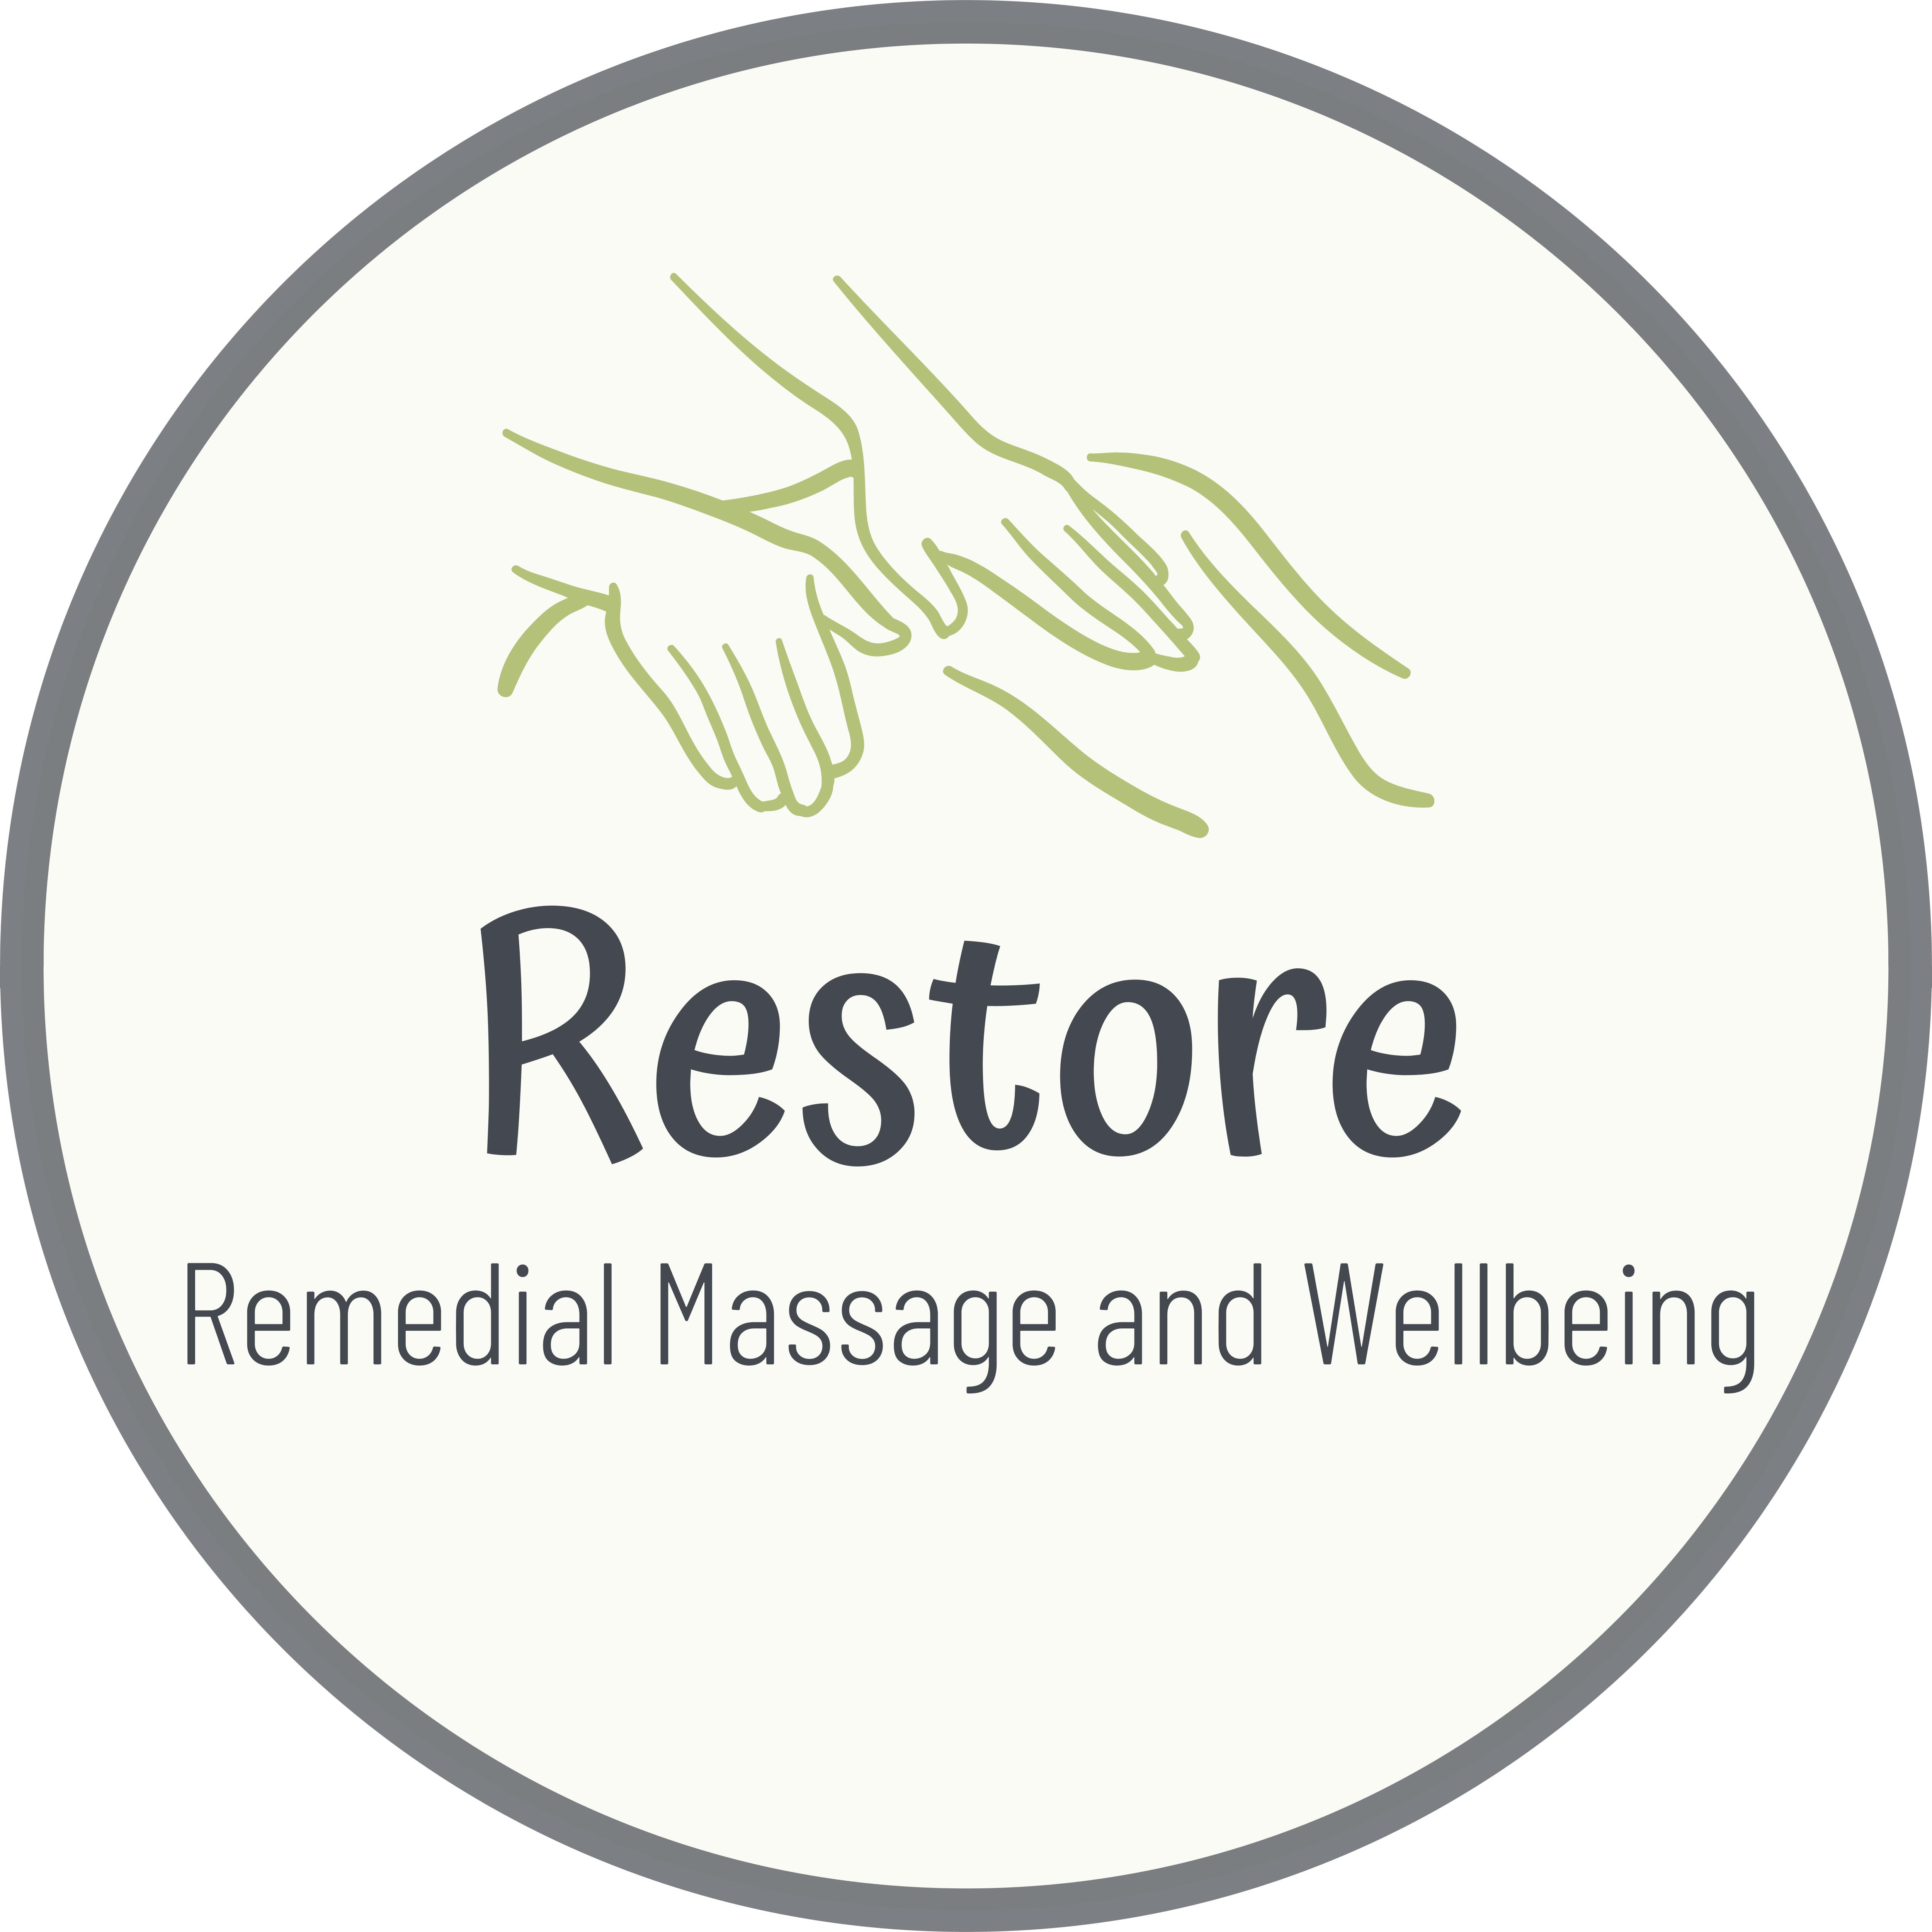 Restore Remedial Massage And Wellbeing